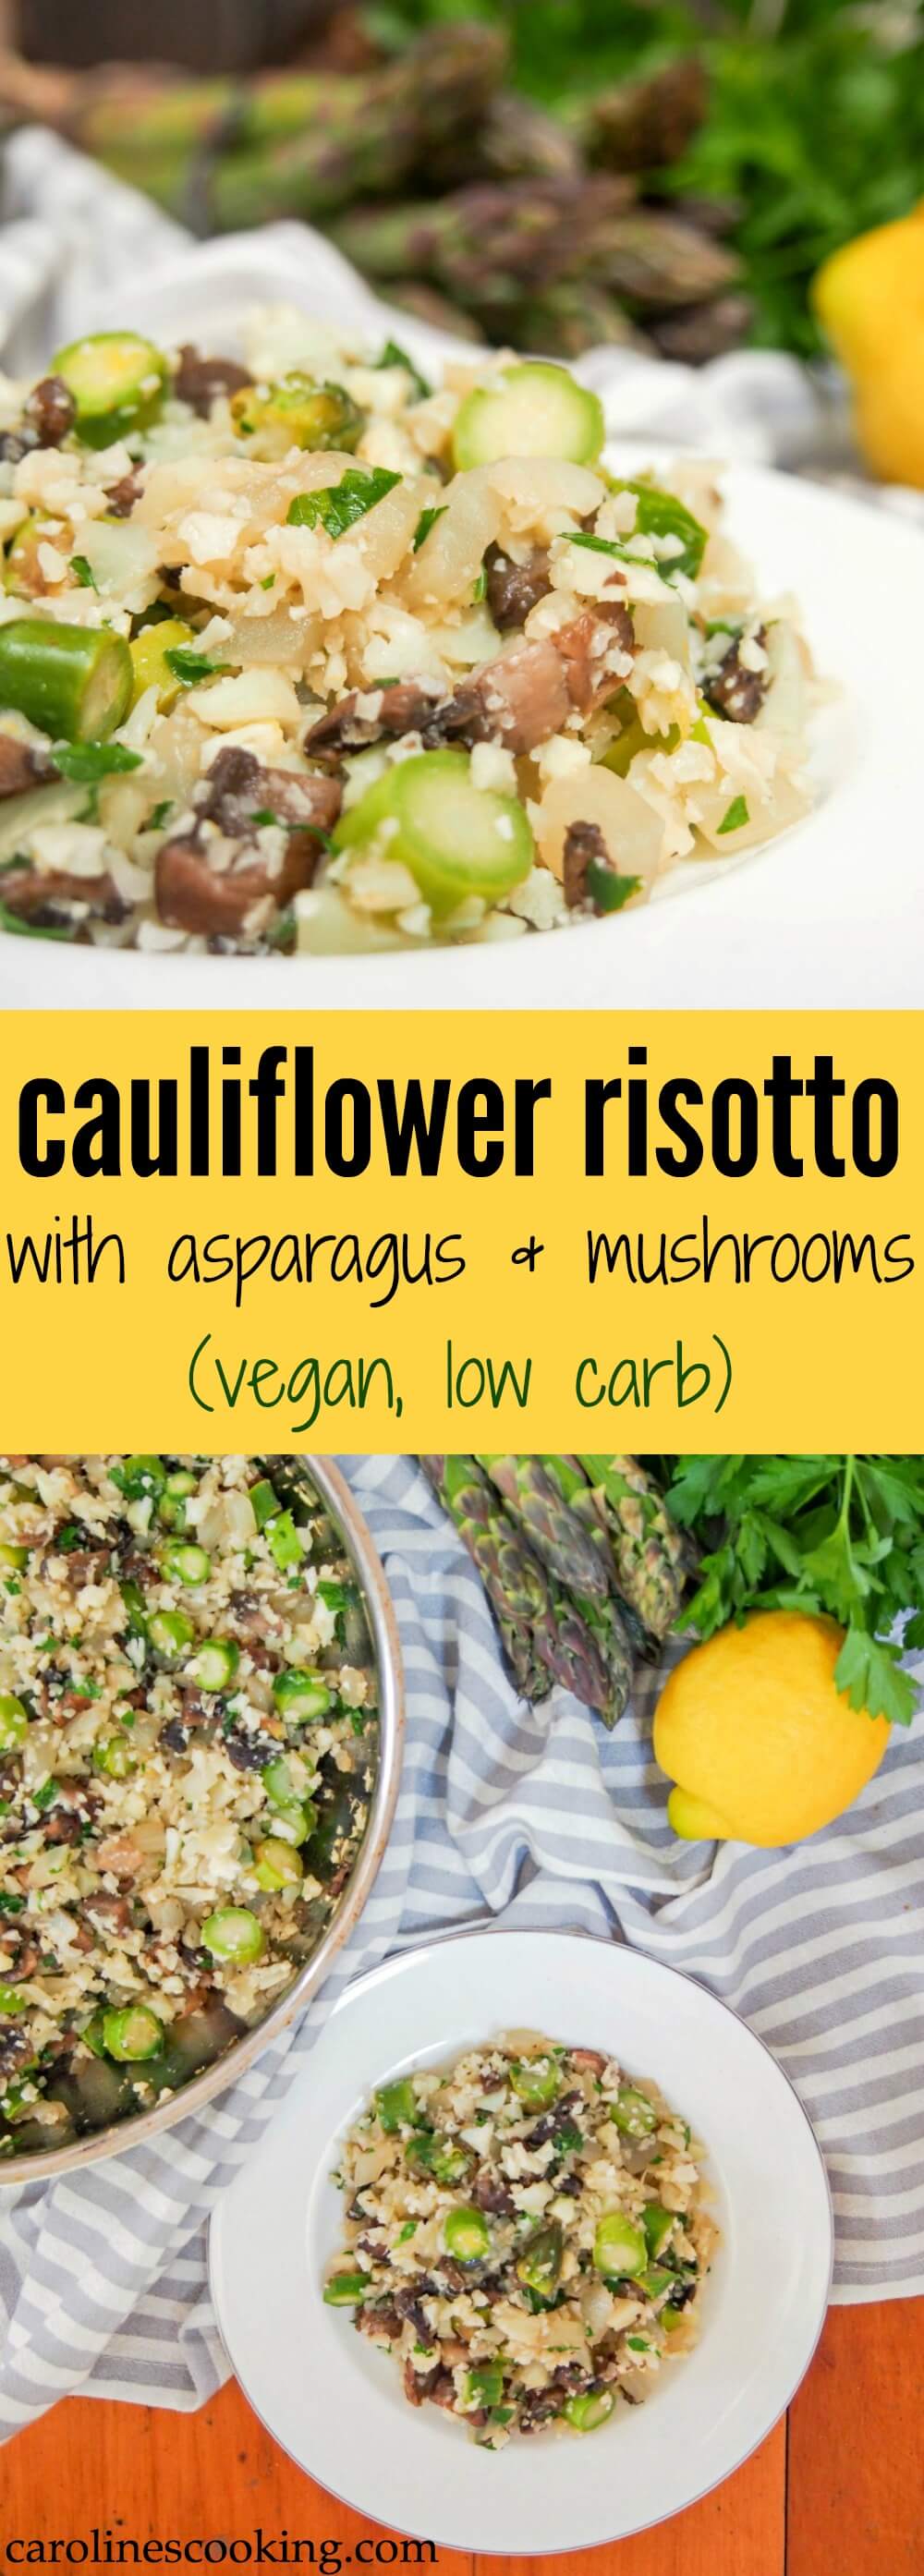 This cauliflower risotto with mushroom and asparagus is more than just another cauliflower rice trend meal - it's full of flavor, easy and ready in less than 30 min.  Low carb & vegan too.